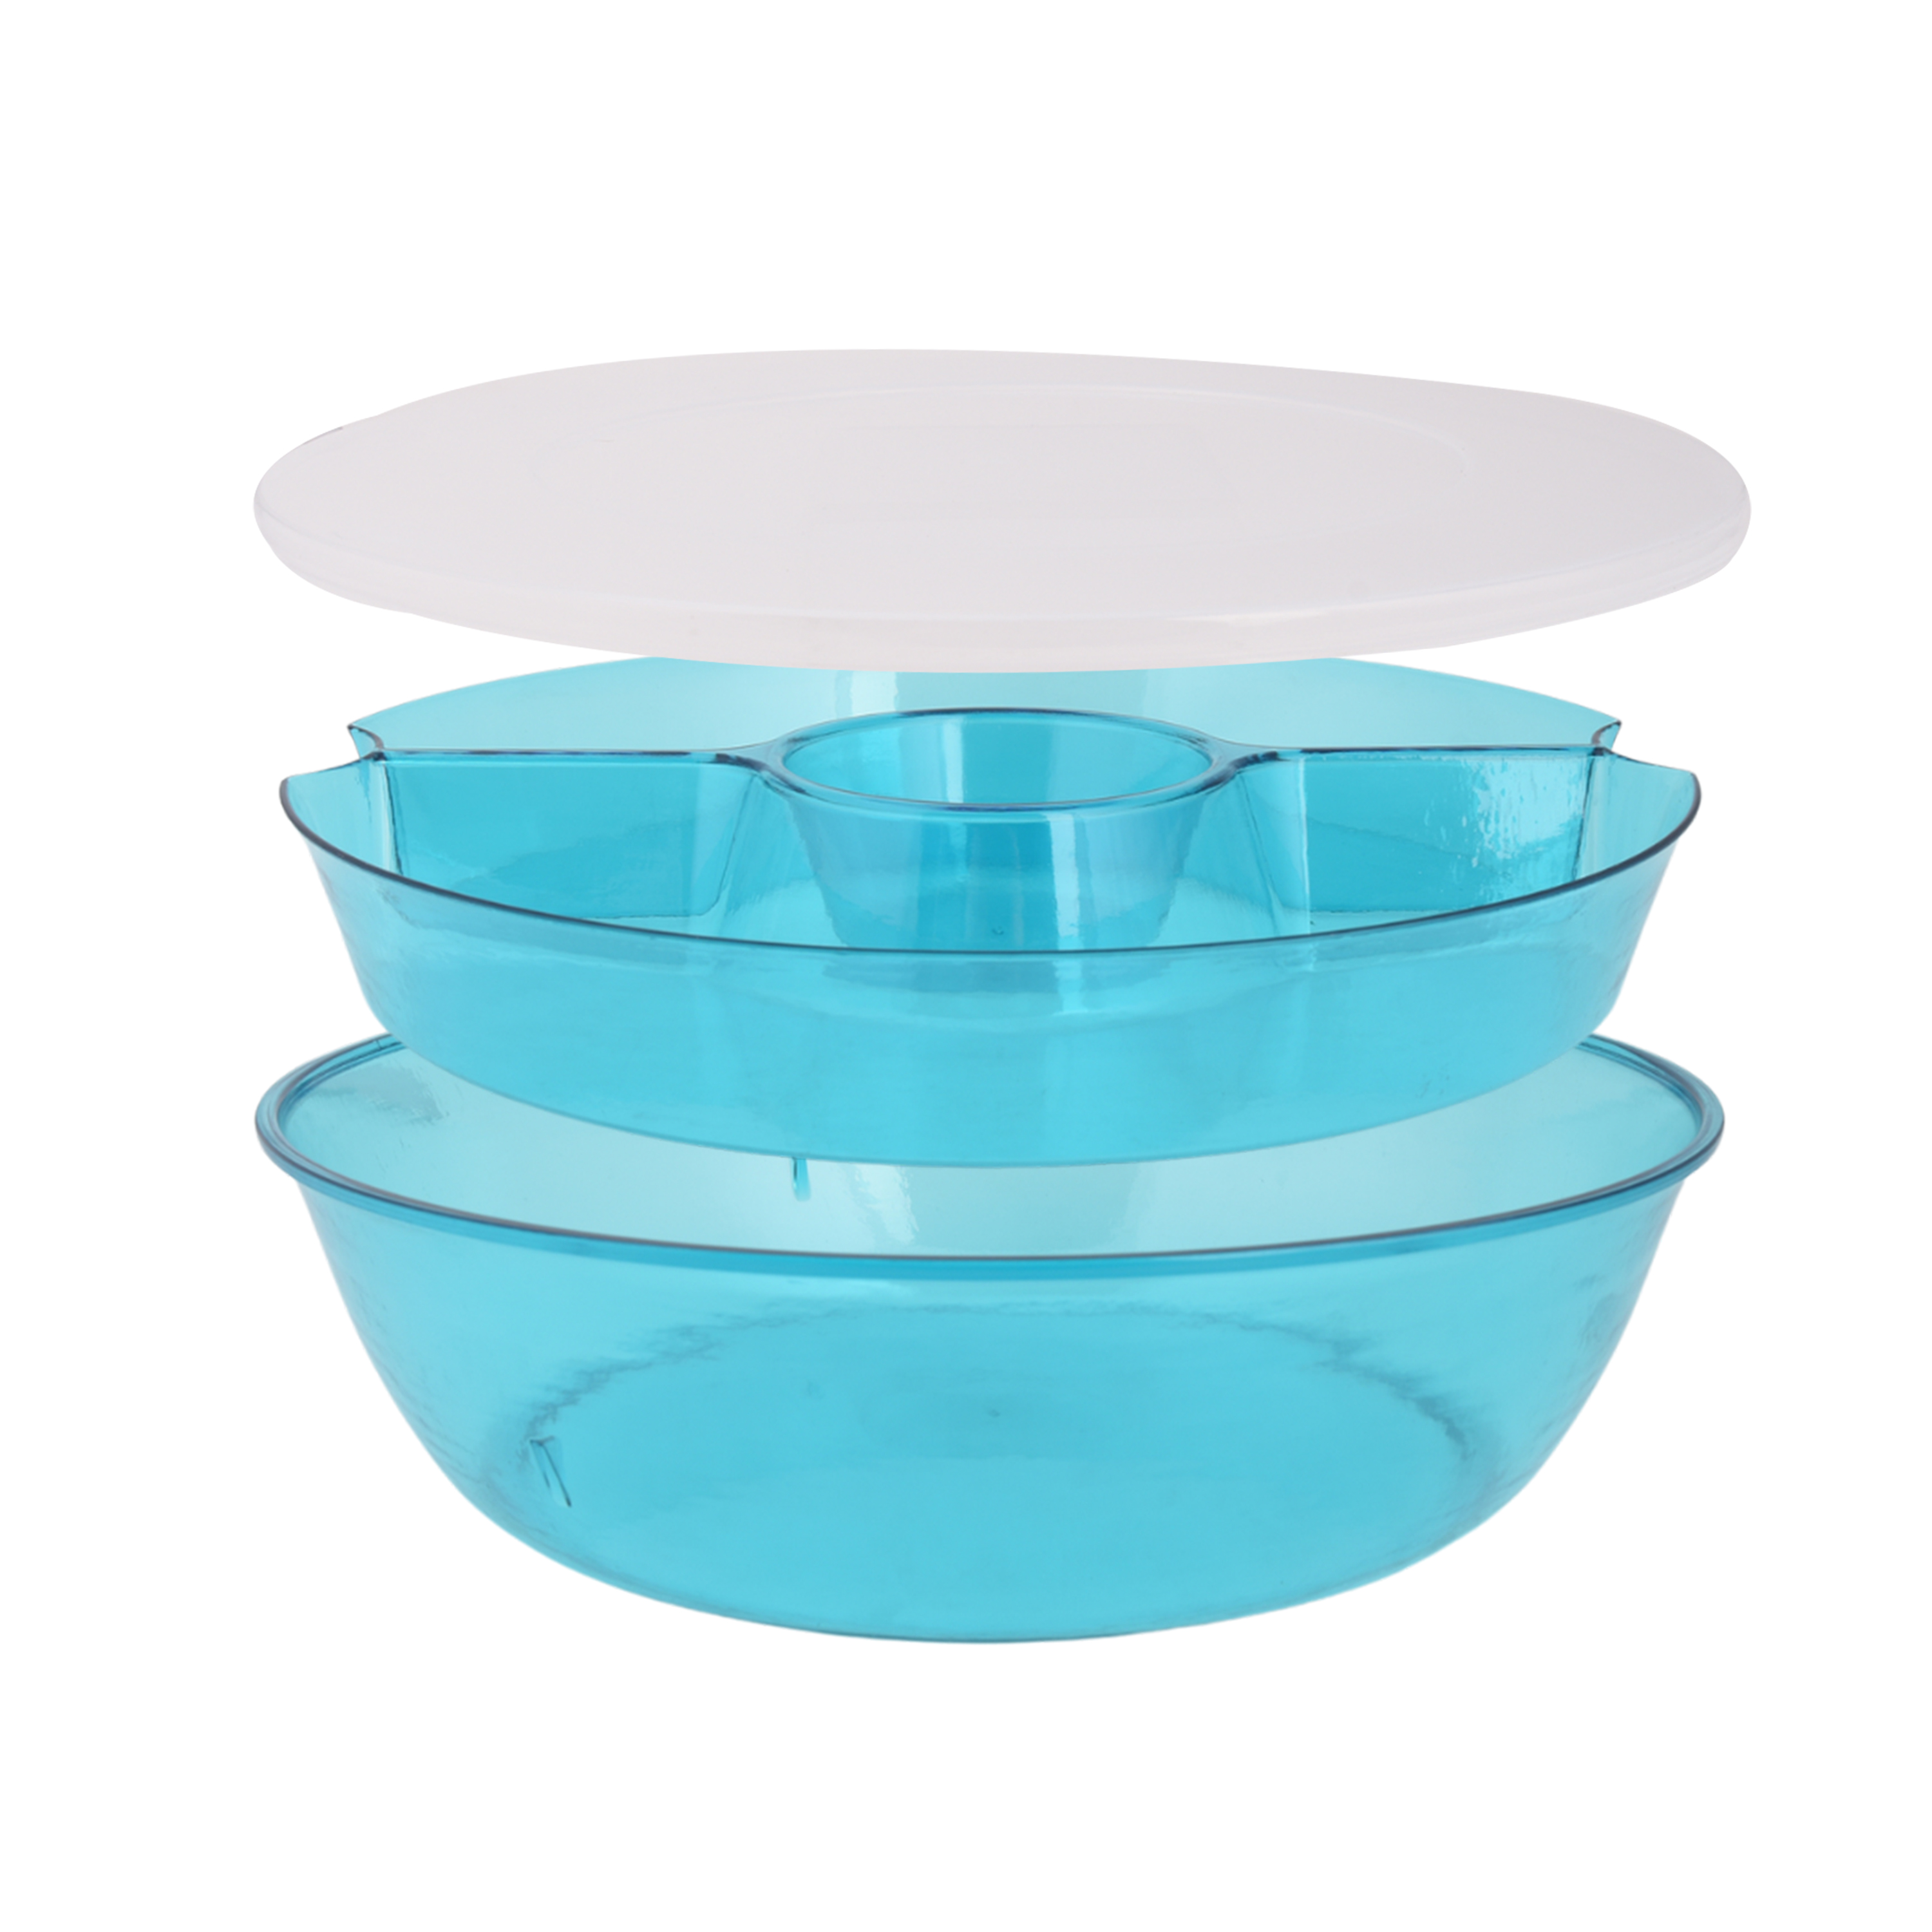 Mainstays Acrylic Appetizer On Ice Serving Tray with Lid, Blue - image 4 of 8